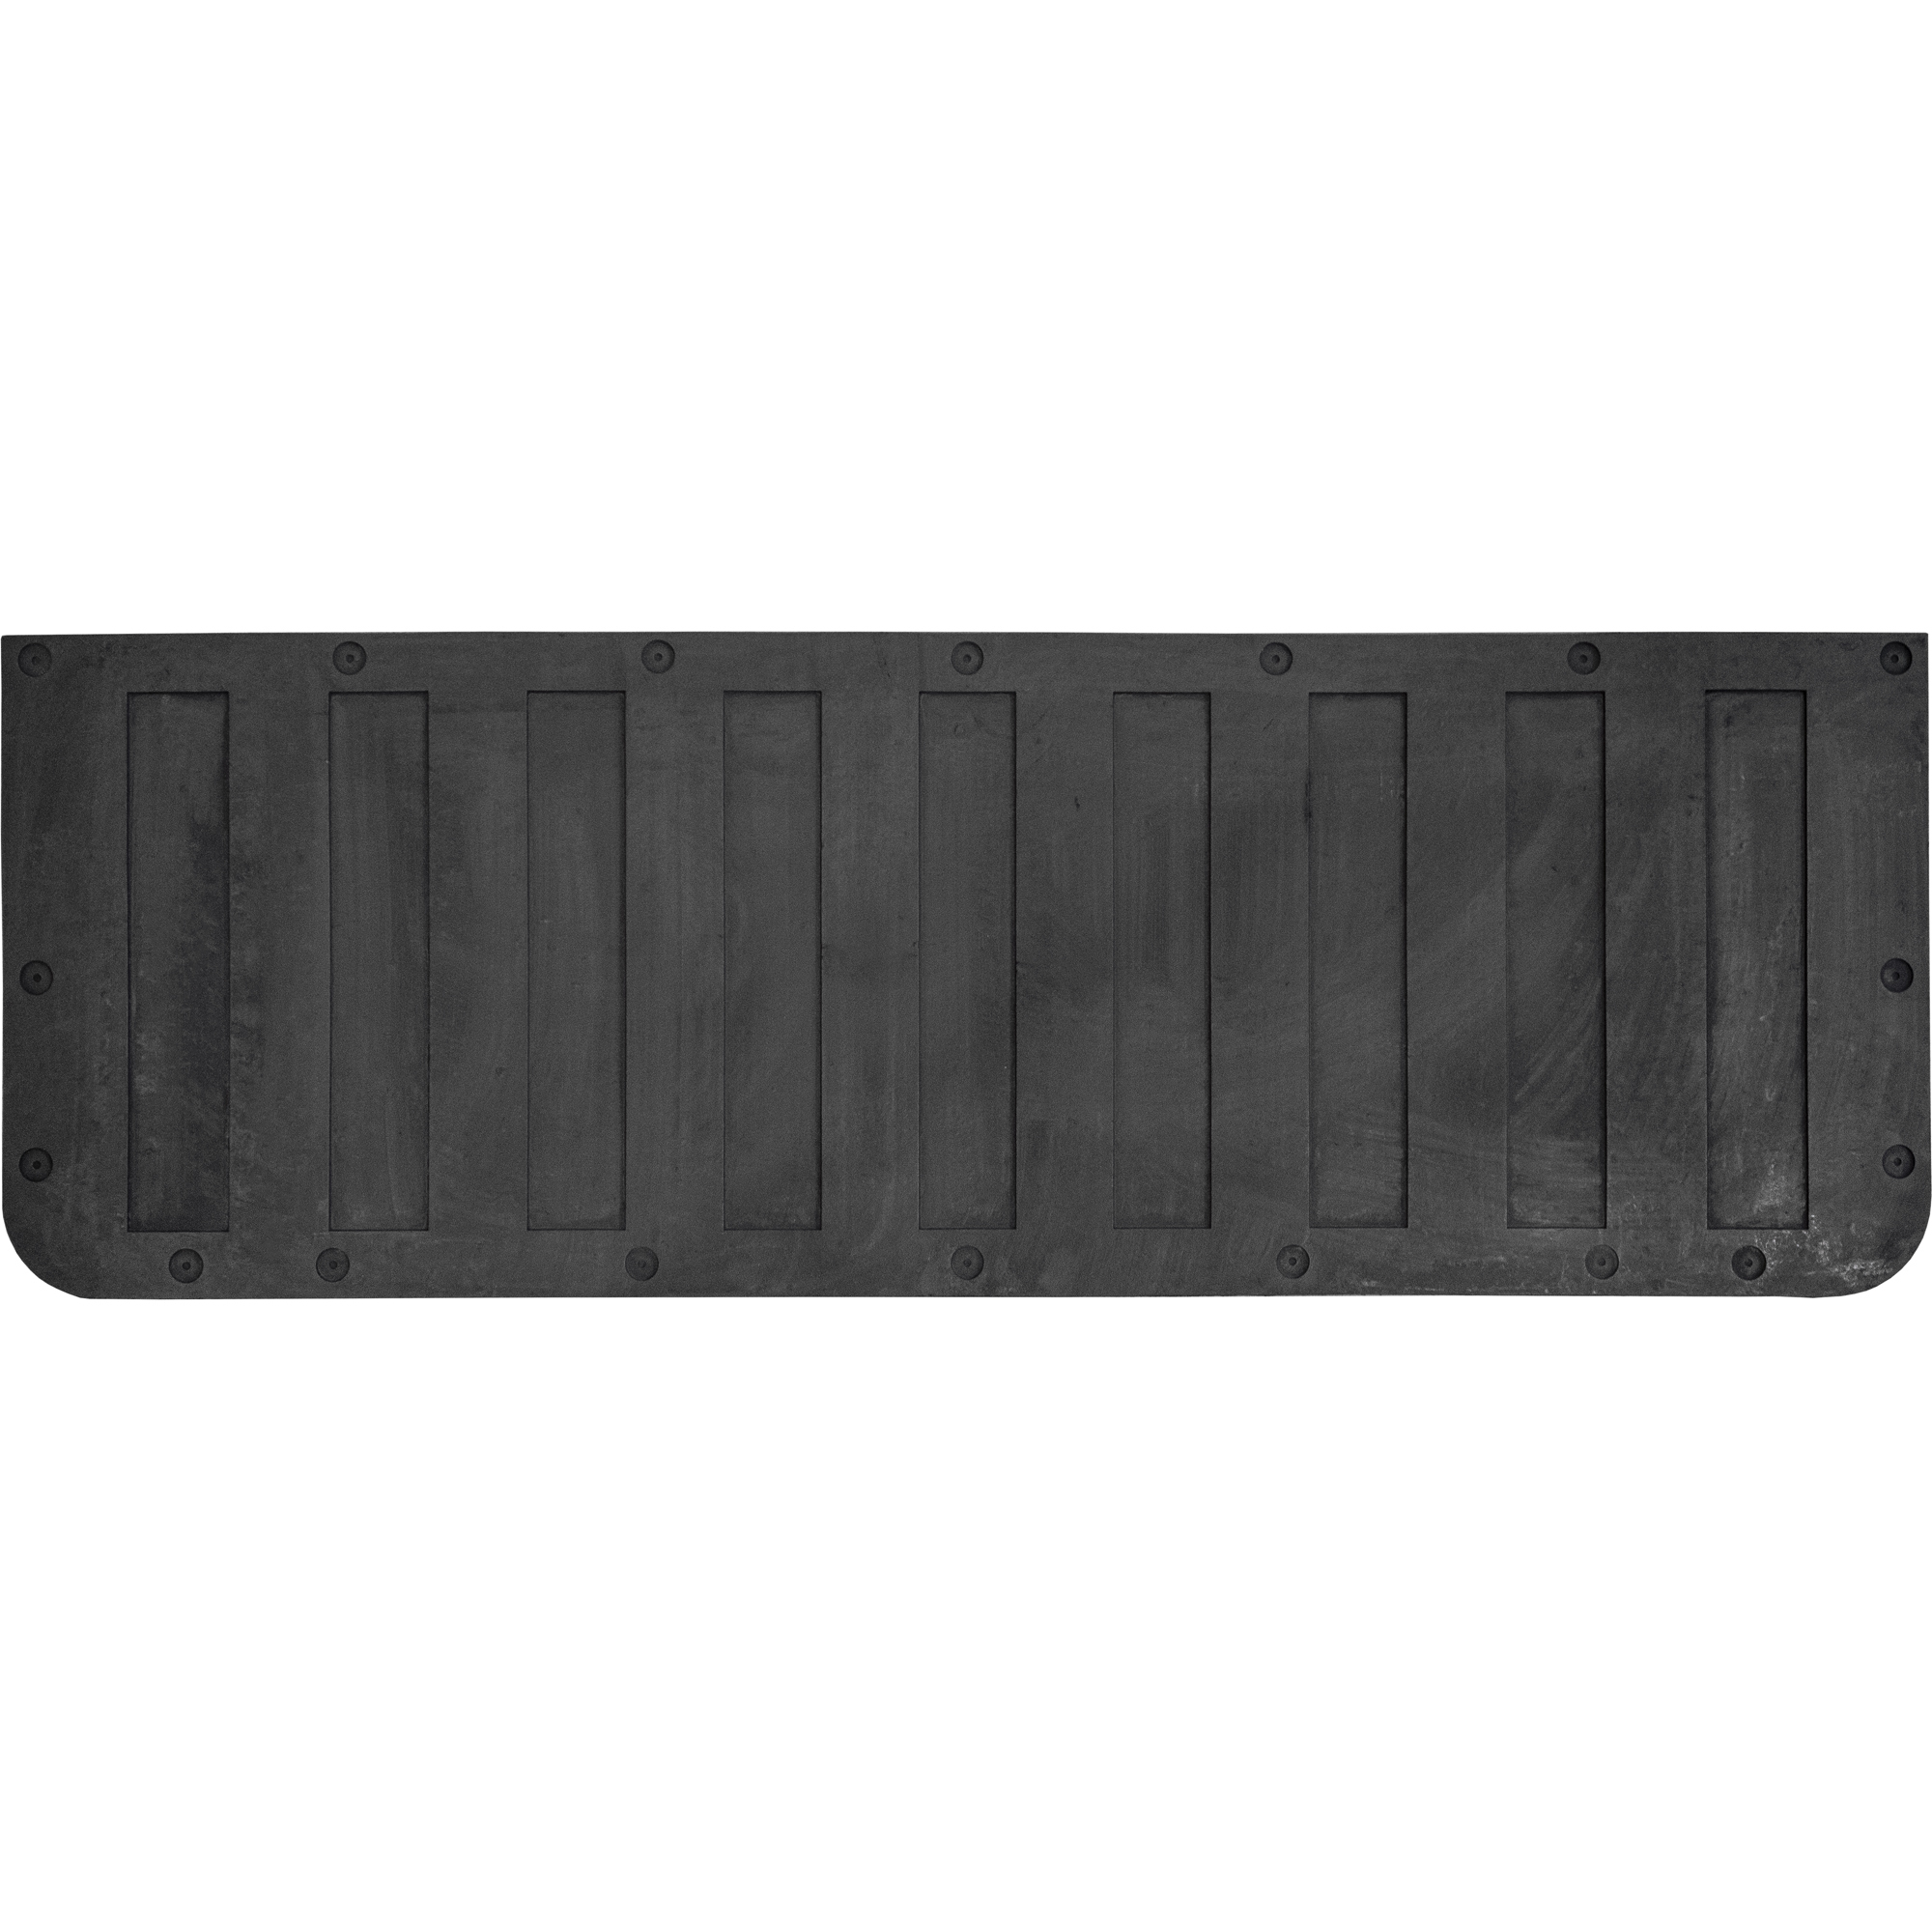 Boomerang Rubber, Ford F-150 Truck Tailgate Mat, Long/Short Bed, Primary Color Black, Model TM G BAGGED